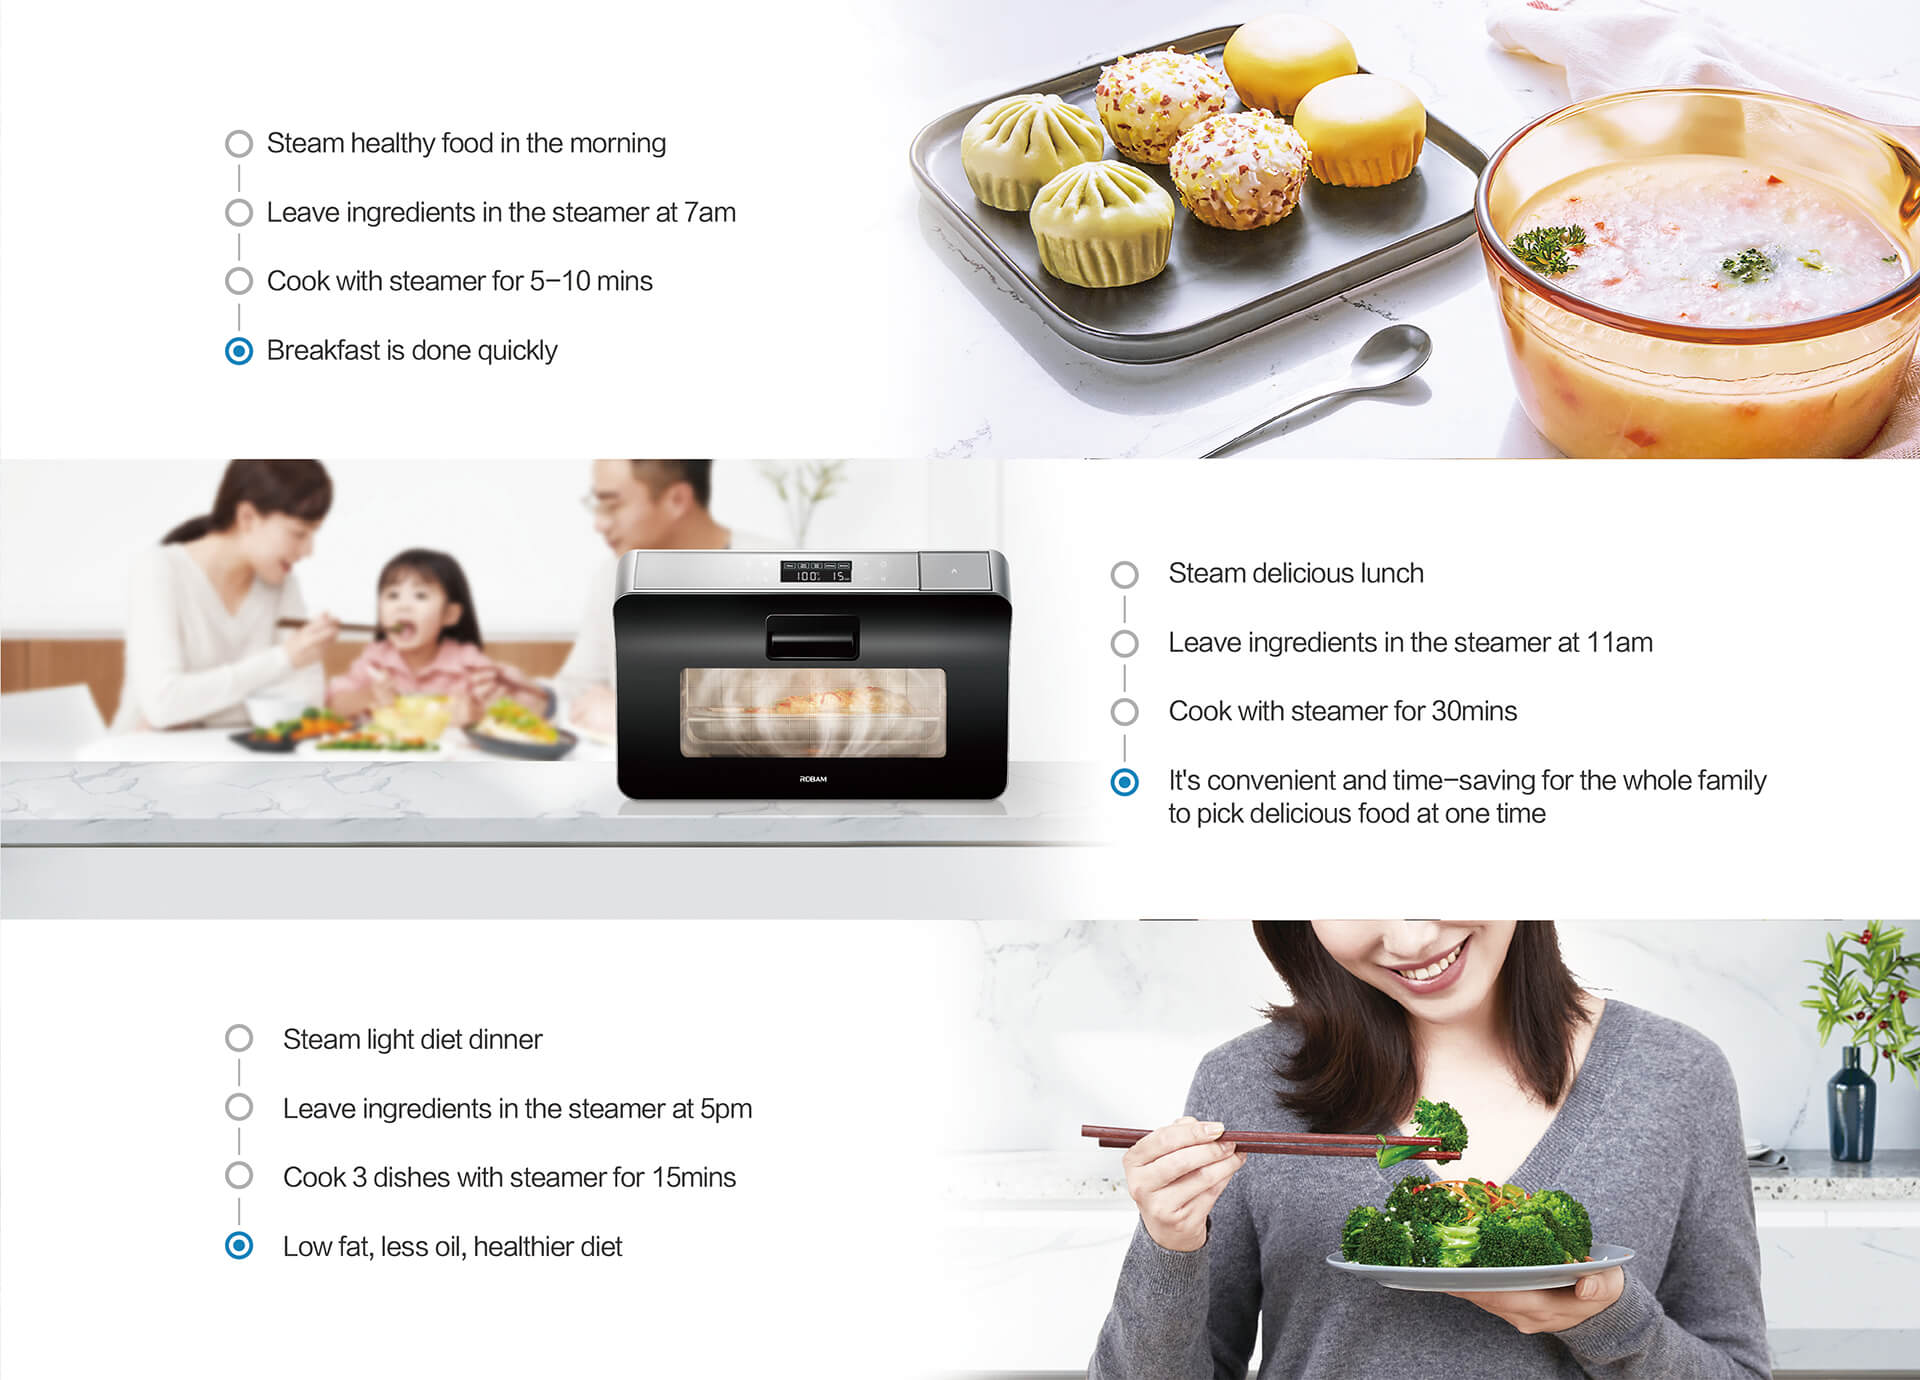 the taste of food is better: after heating in microwave oven, the taste of food will be lost and the things made will dry; while the original technology of the ROBAM steamer makes the air circulation in the 